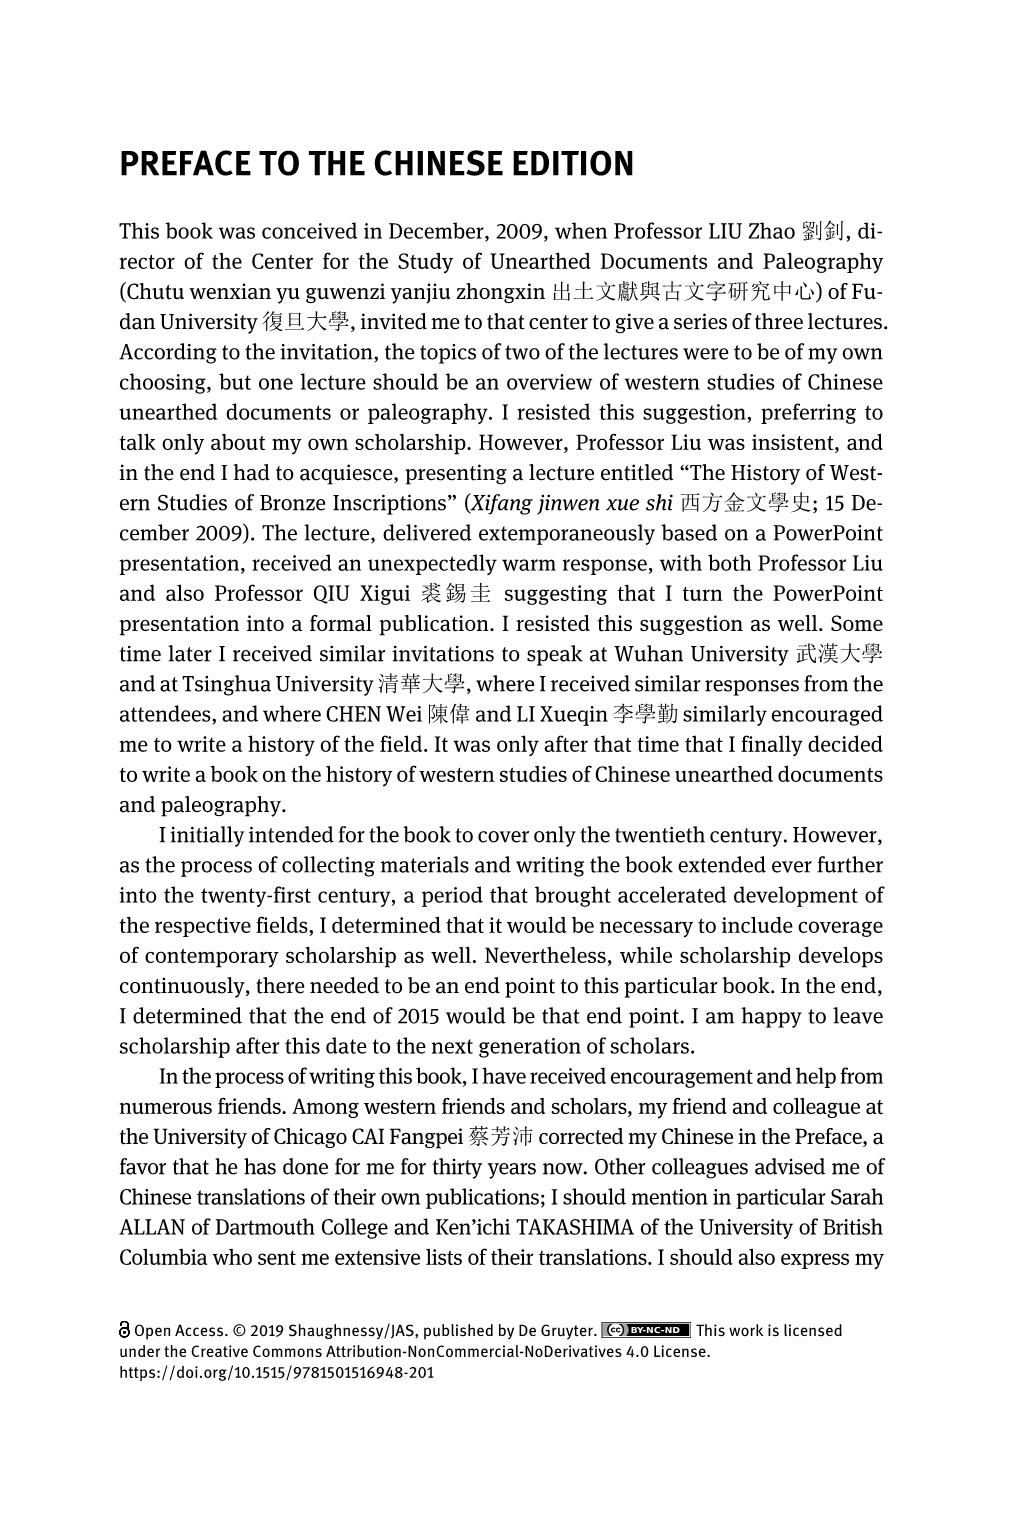 Preface to the Chinese Edition